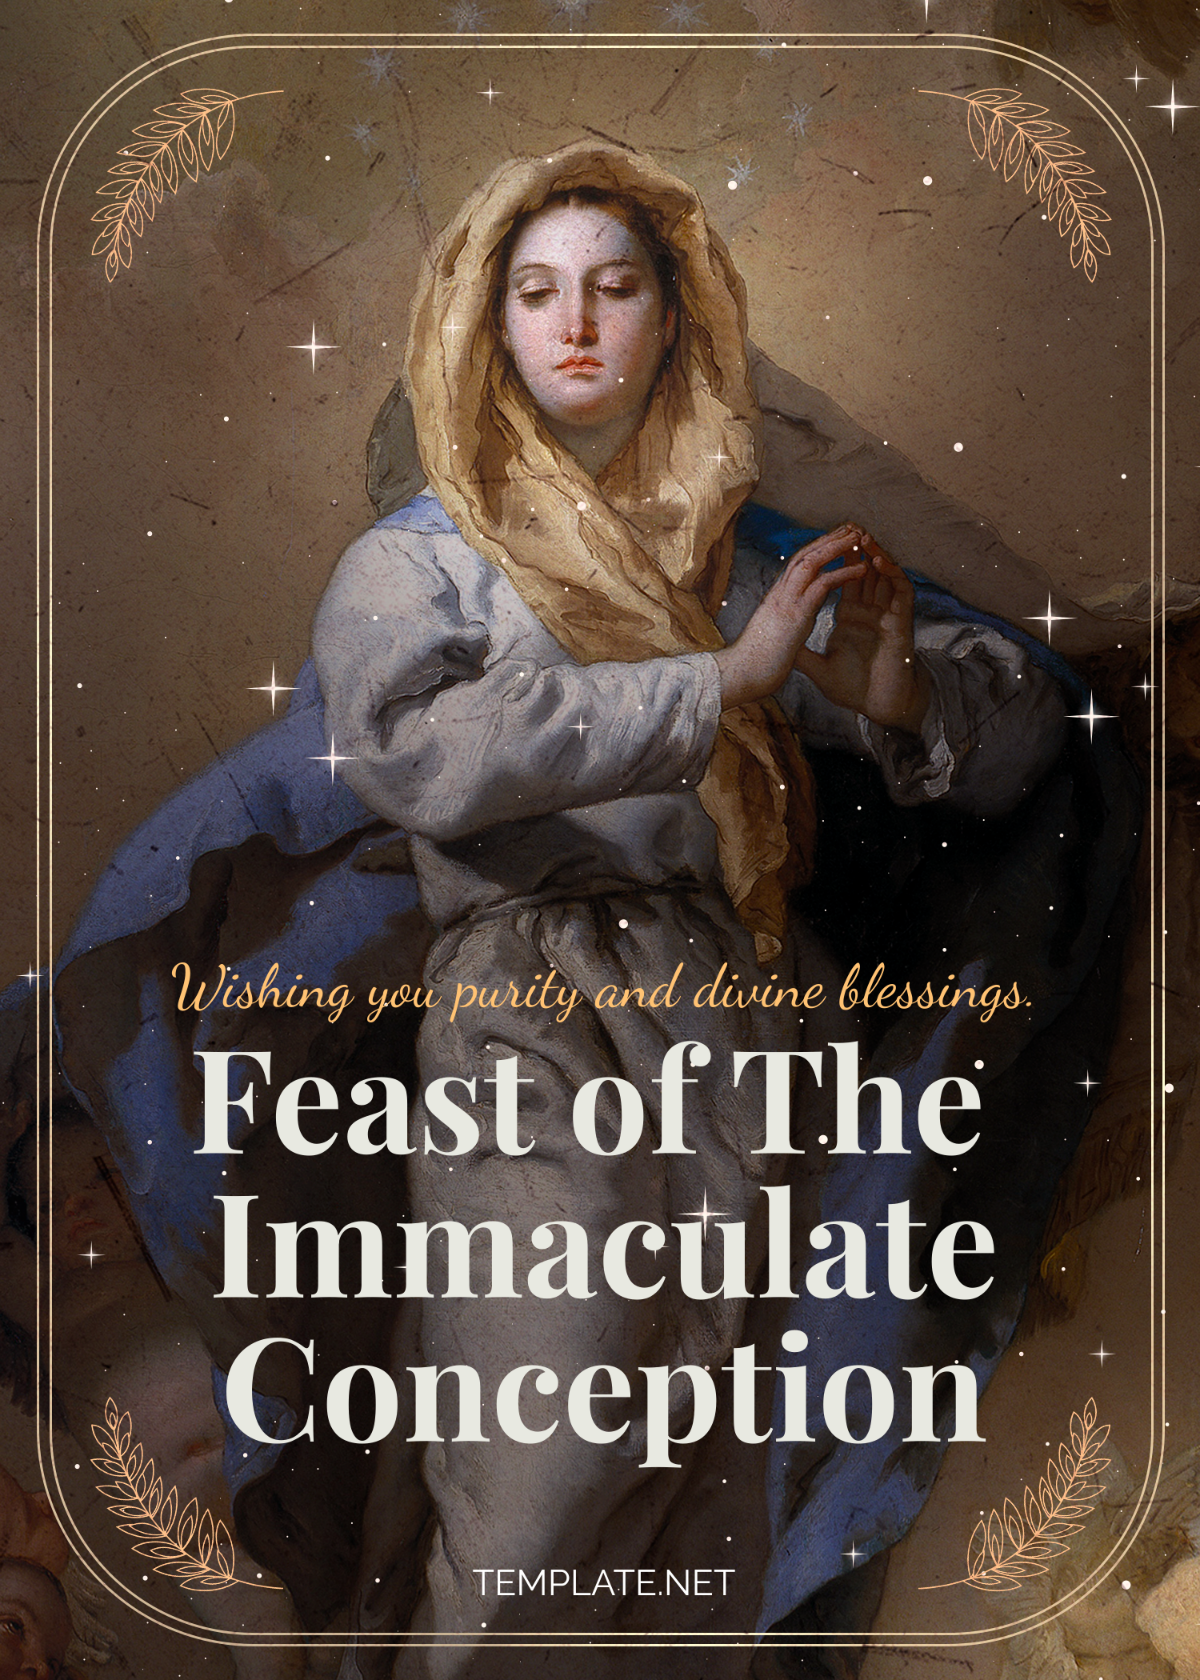 Feast of the Immaculate Conception Wishes Template